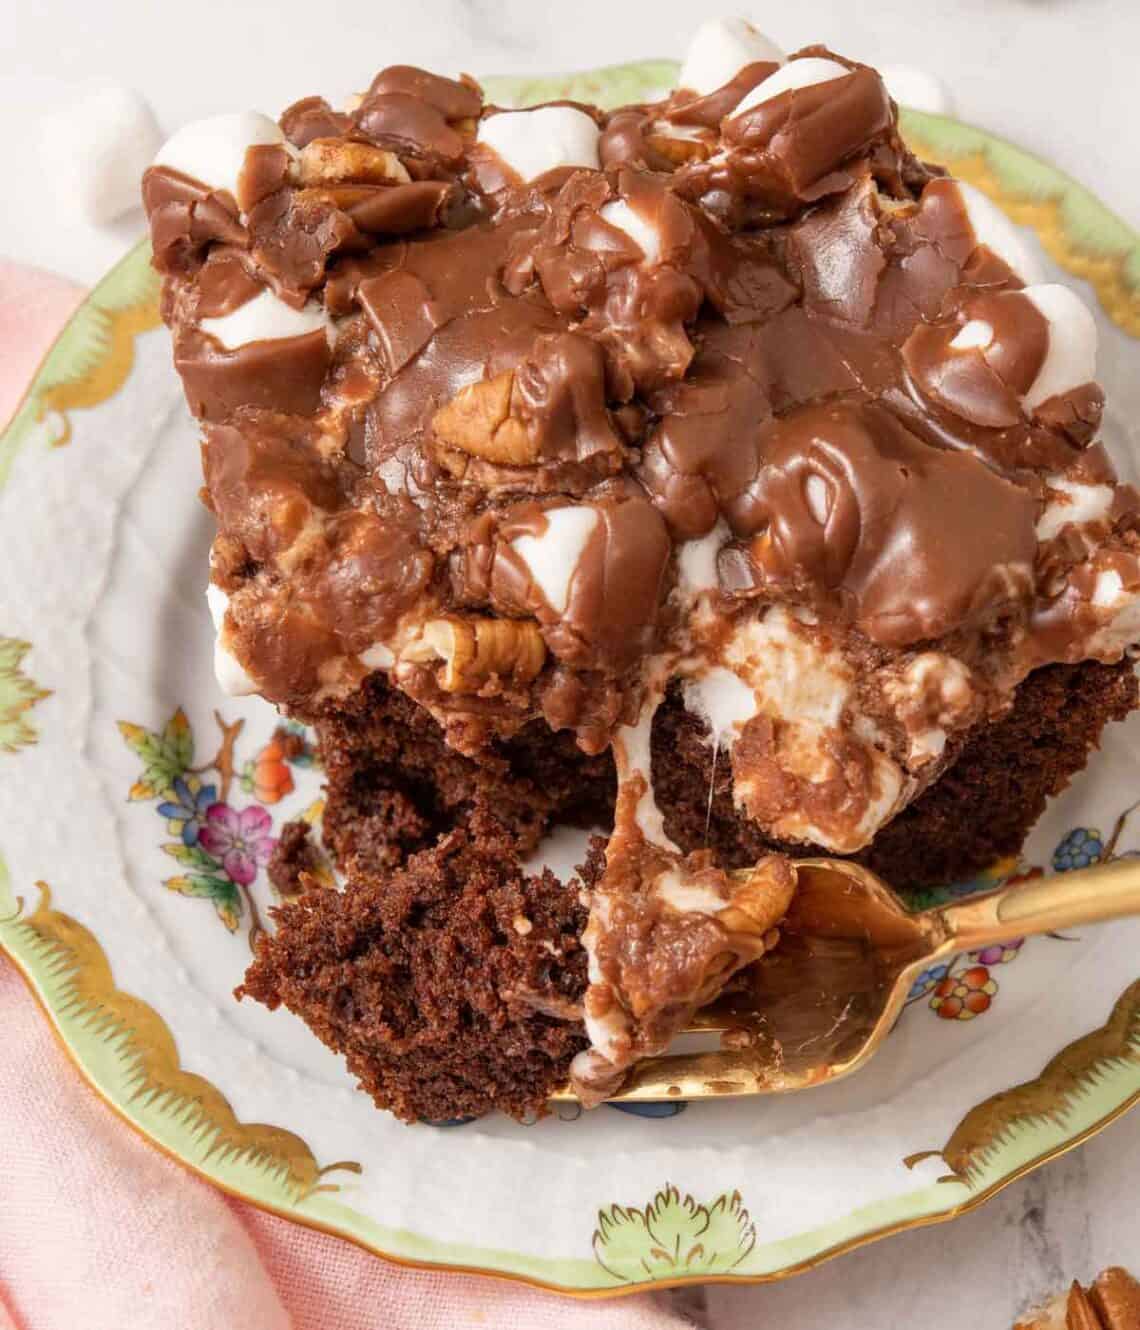 Close up view of a slice of Mississippi mud cake with a fork breaking off a bite.